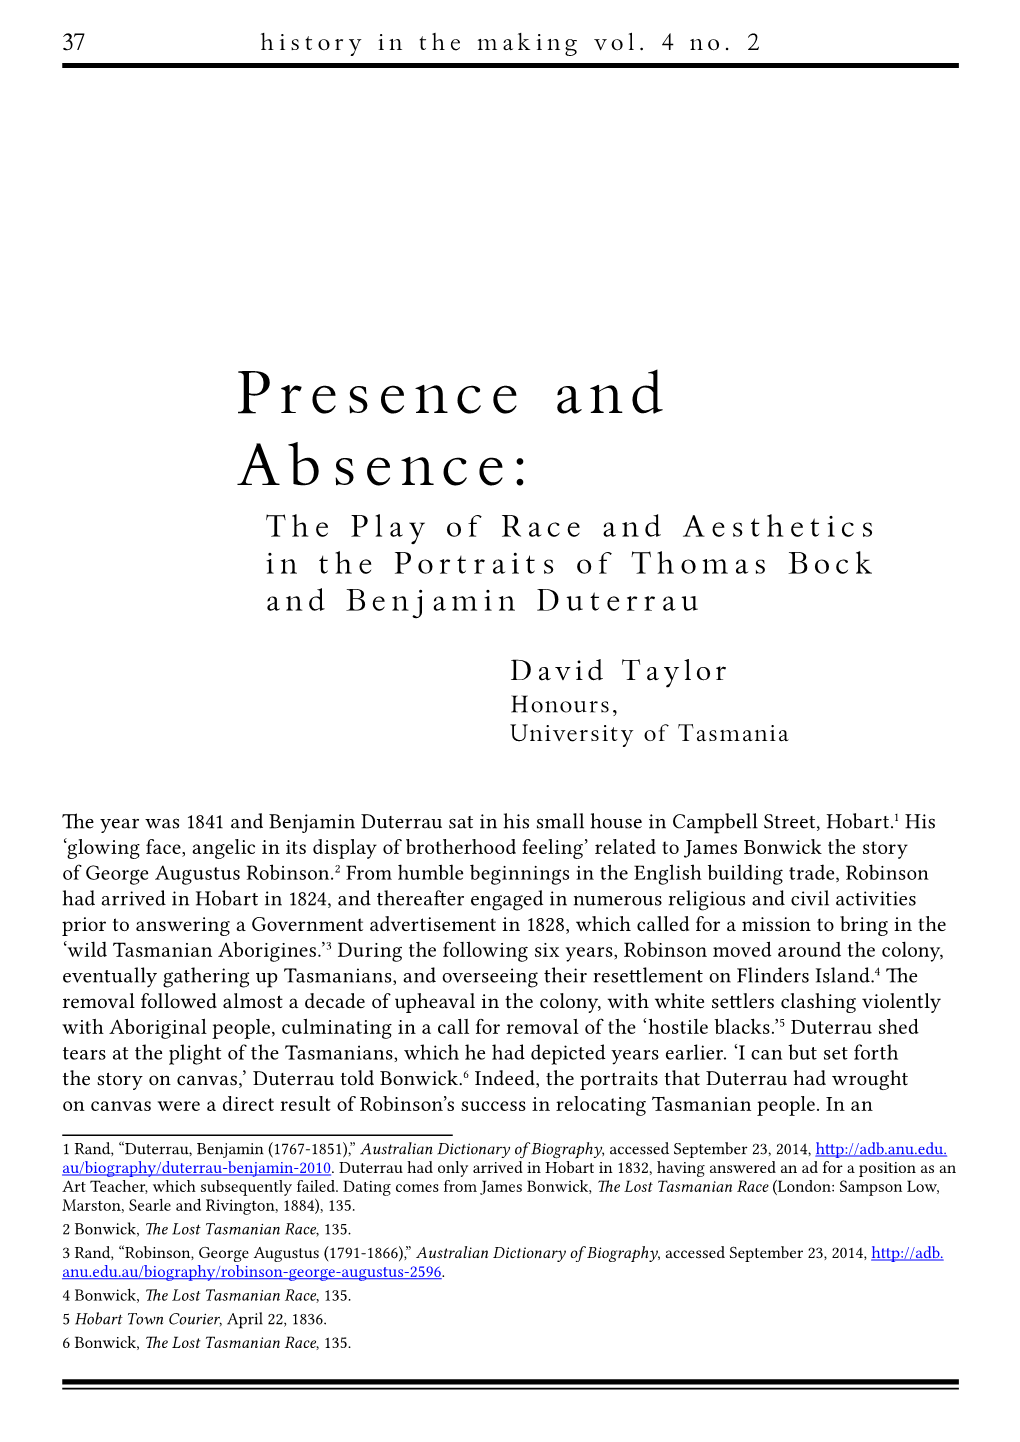 Presence and Absence: the Play of Race and Aesthetics in the Portraits of Thomas Bock and Benjamin Duterrau